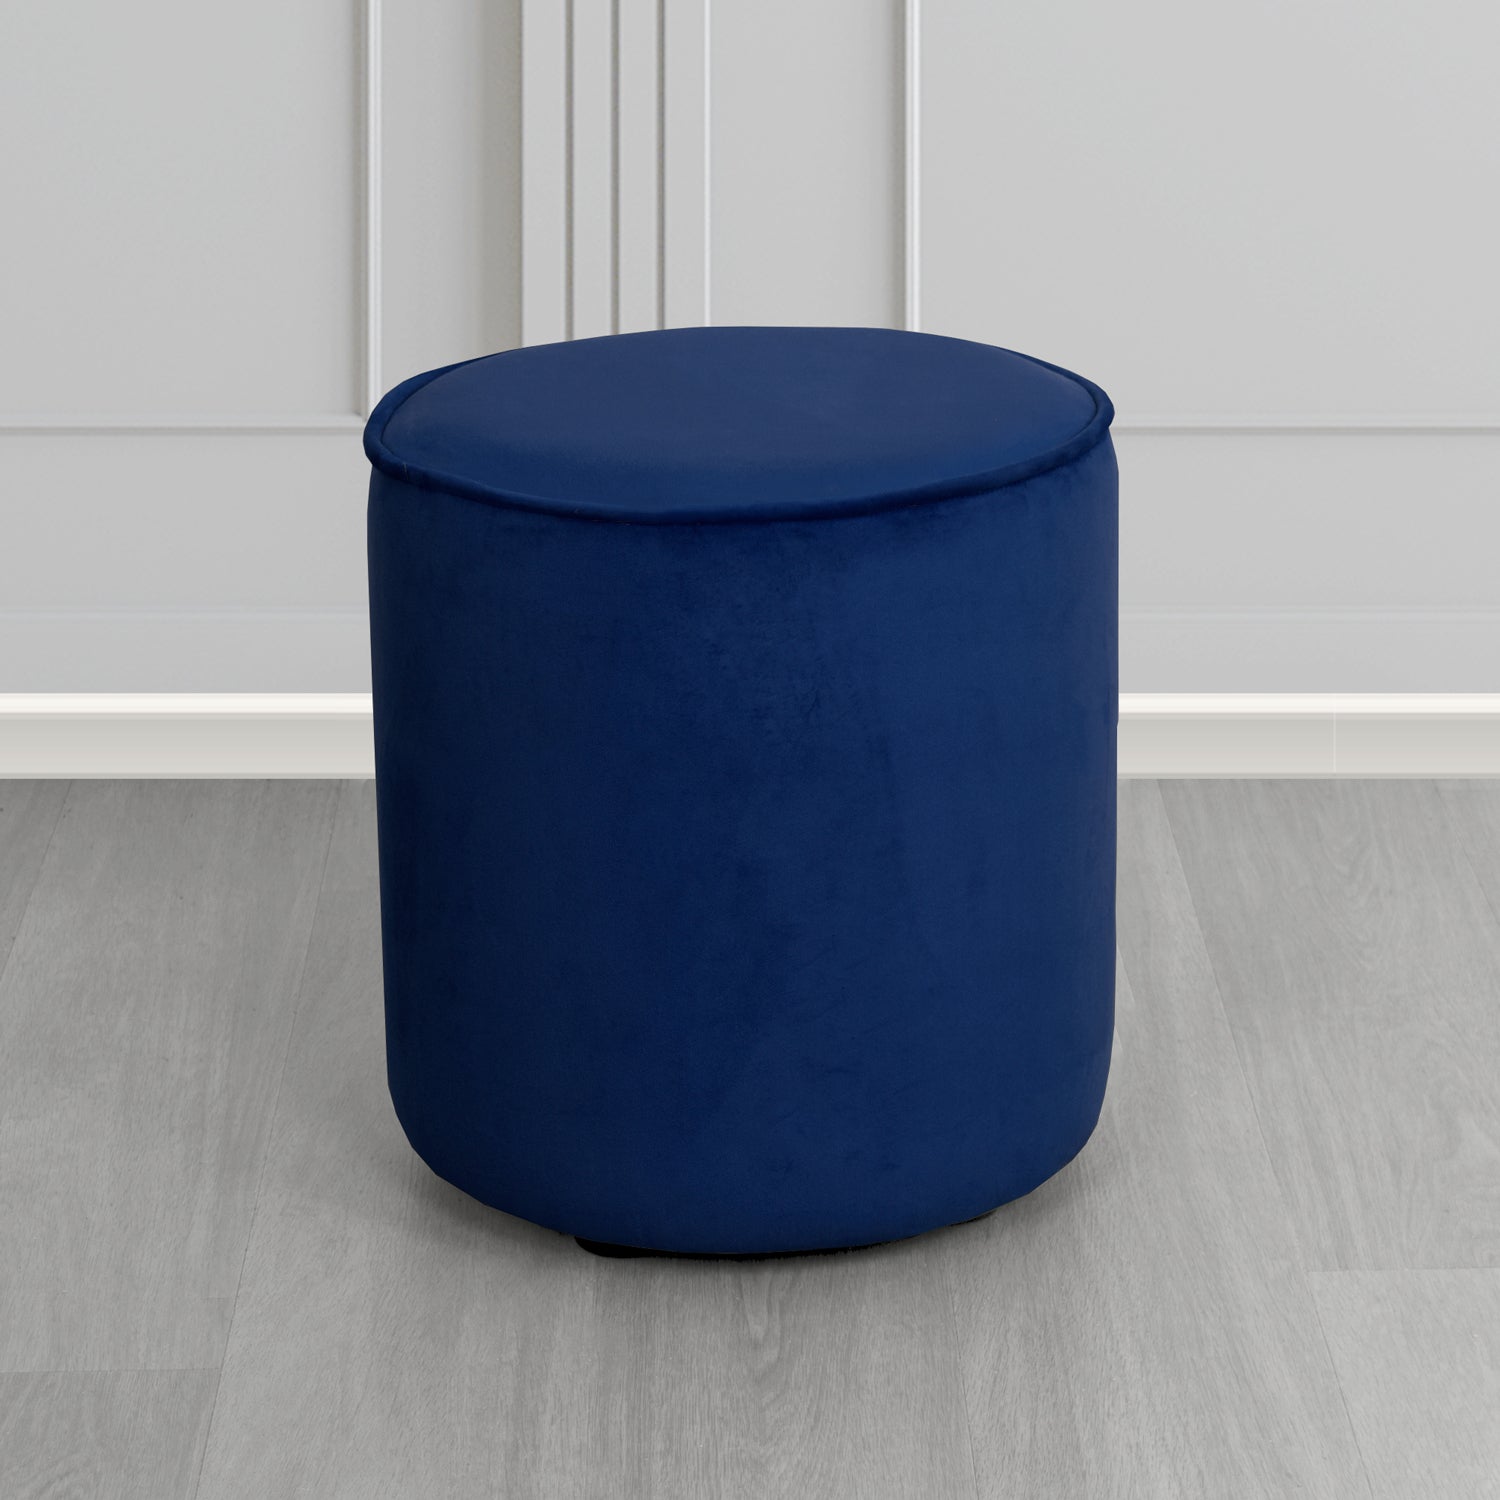 Betsy Round Footstool in Monaco Royal Velvet Fabric - The Tub Chair Shop